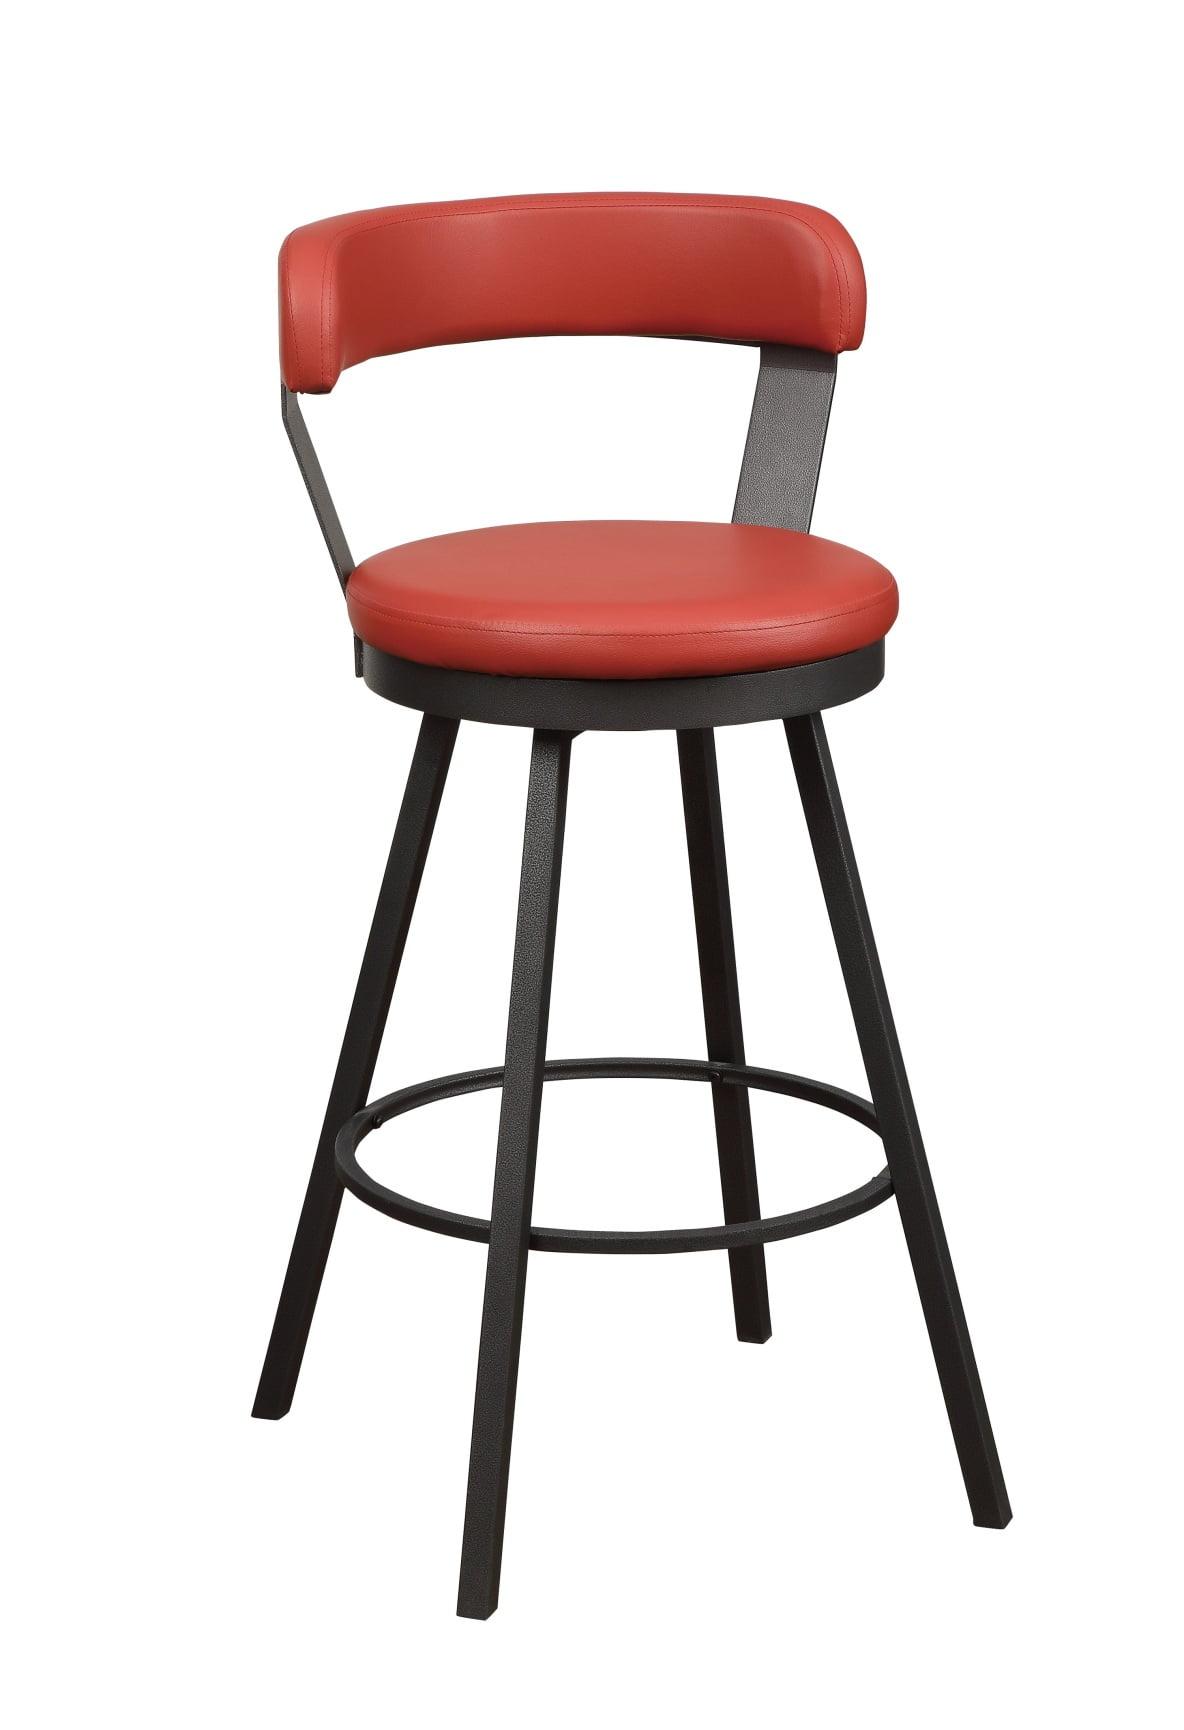 Gray Leather Swivel Bar Stool with Metal Base